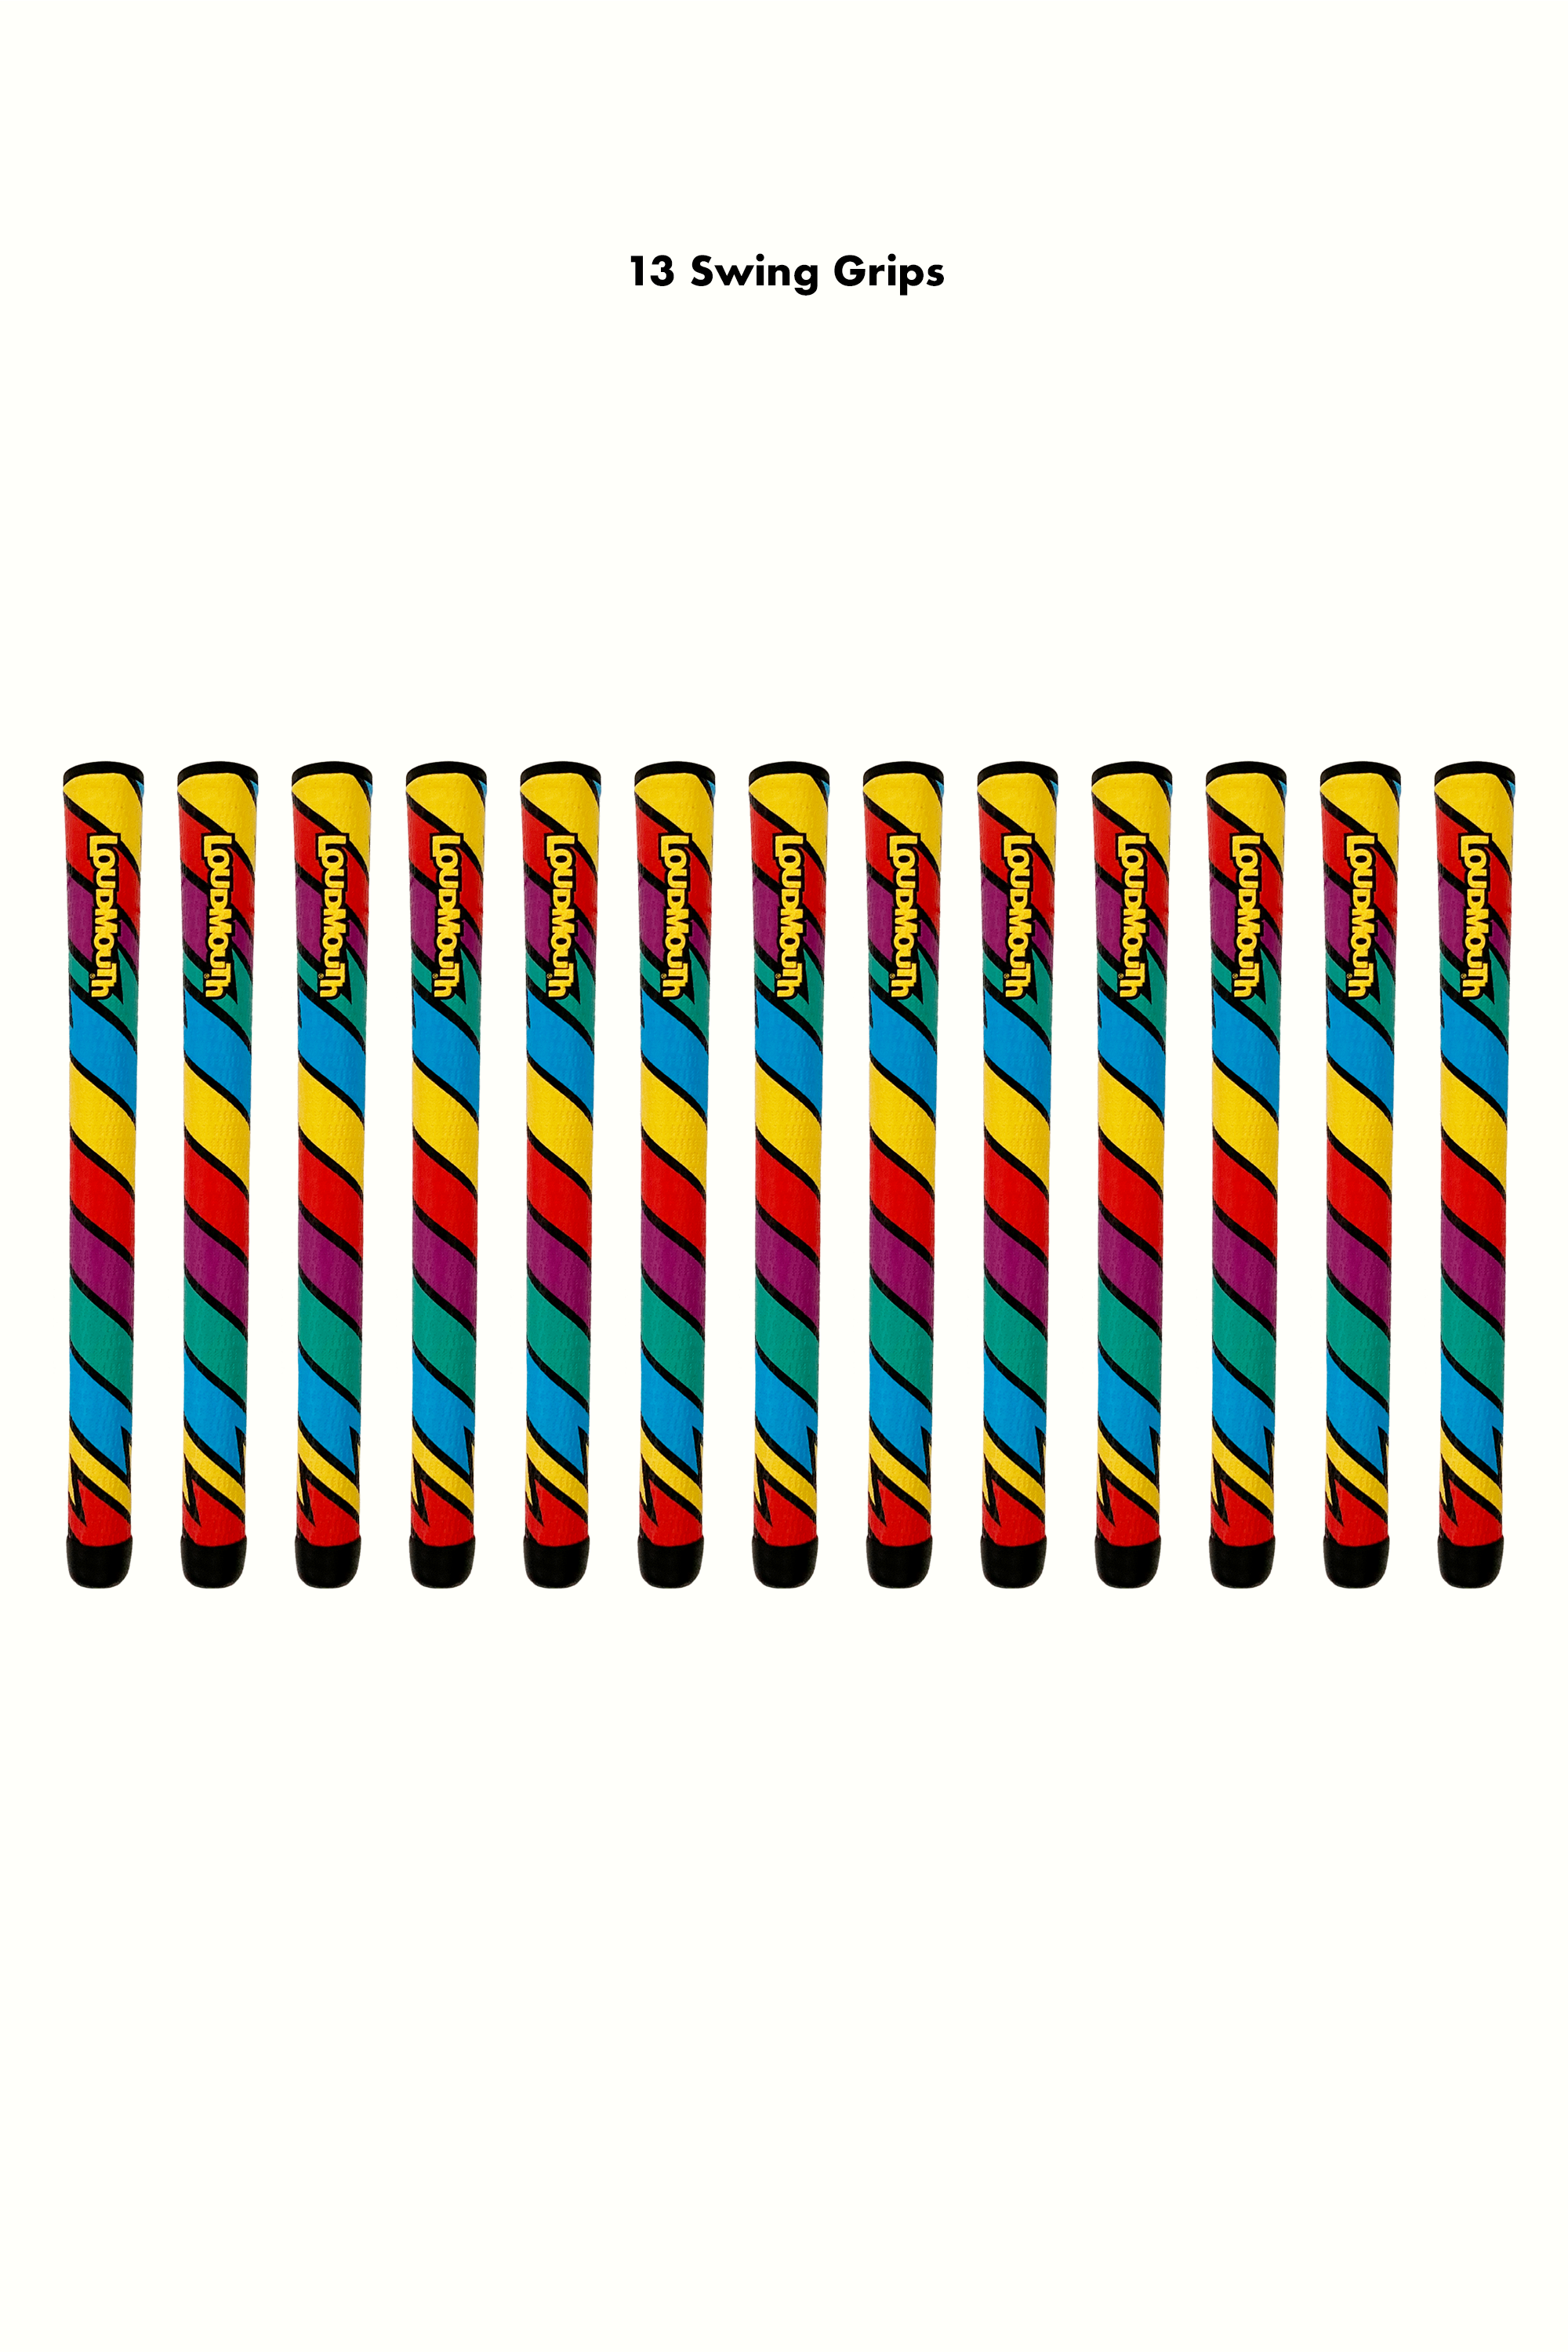 A pack of brightly colored golf grips